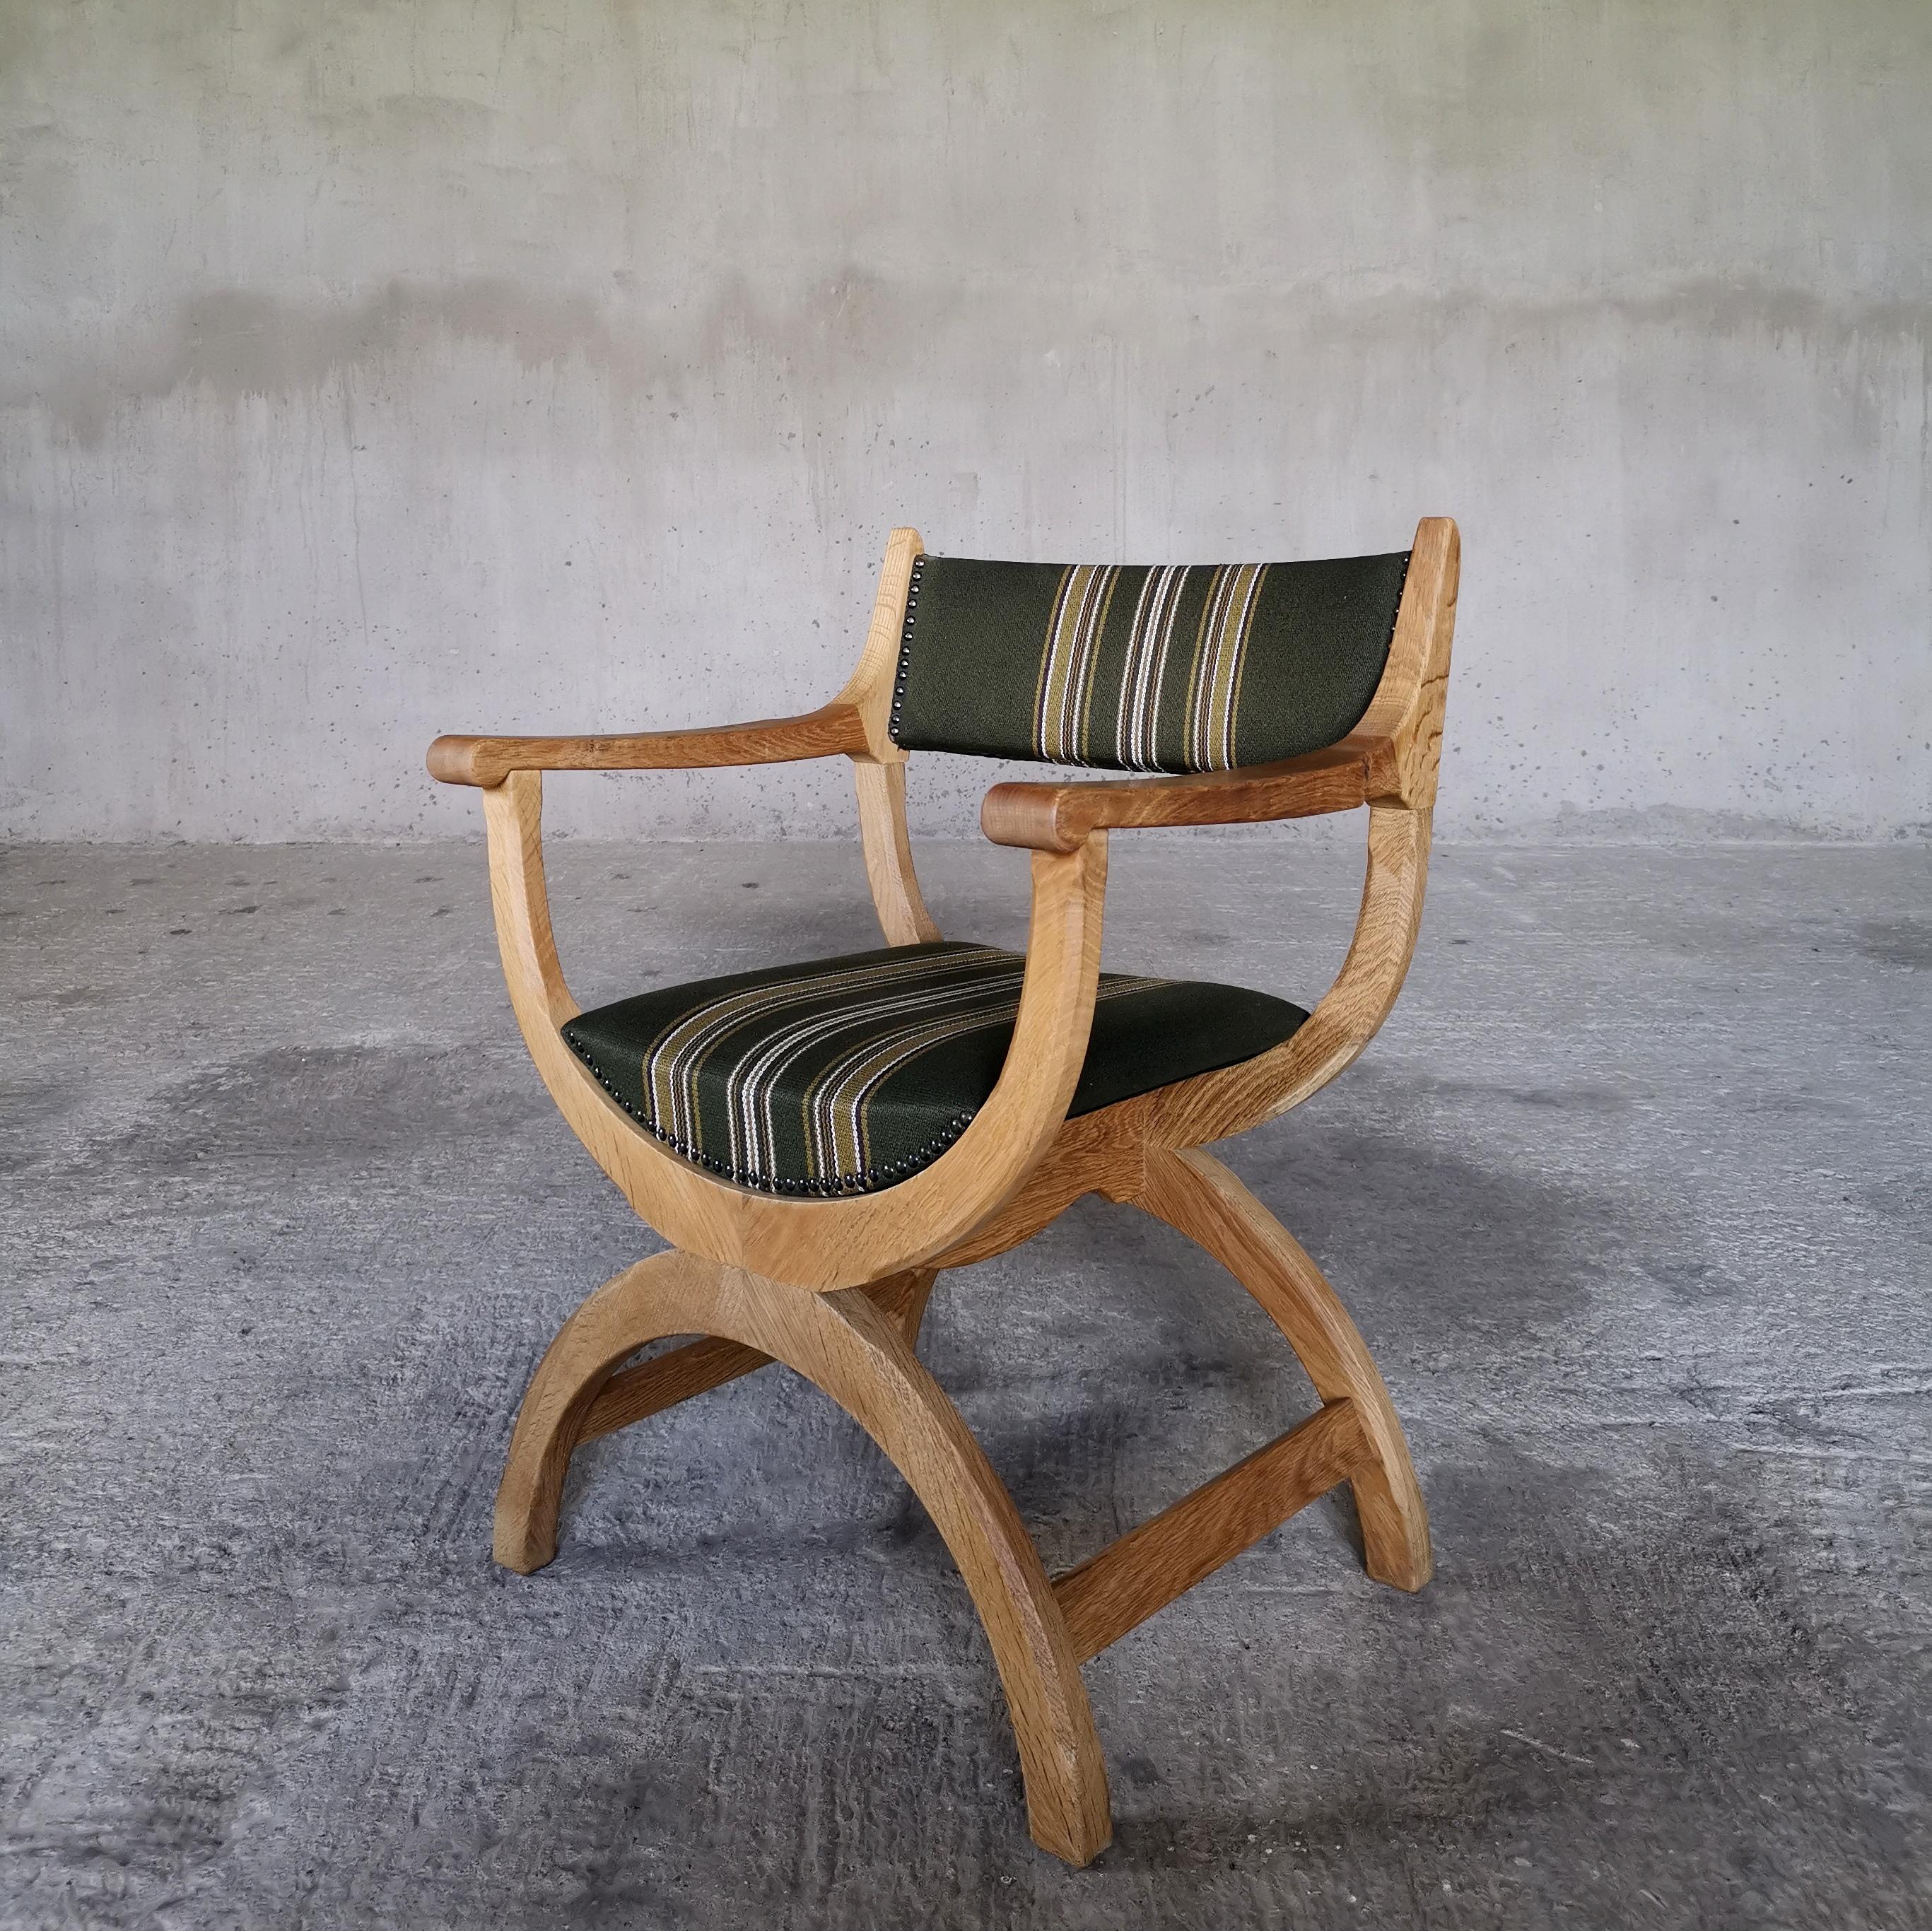 Kurul chair in solid oak. Original green striped upholstery wool in good condition, brass nails.
Design Henning Kjærnulf
Produced by EG Kvalitetsmøbel 
Denmark 1960s
Vintage condition, wear consistent with age and use. 

W: 62 cm D: 60 cm H: 84 cm